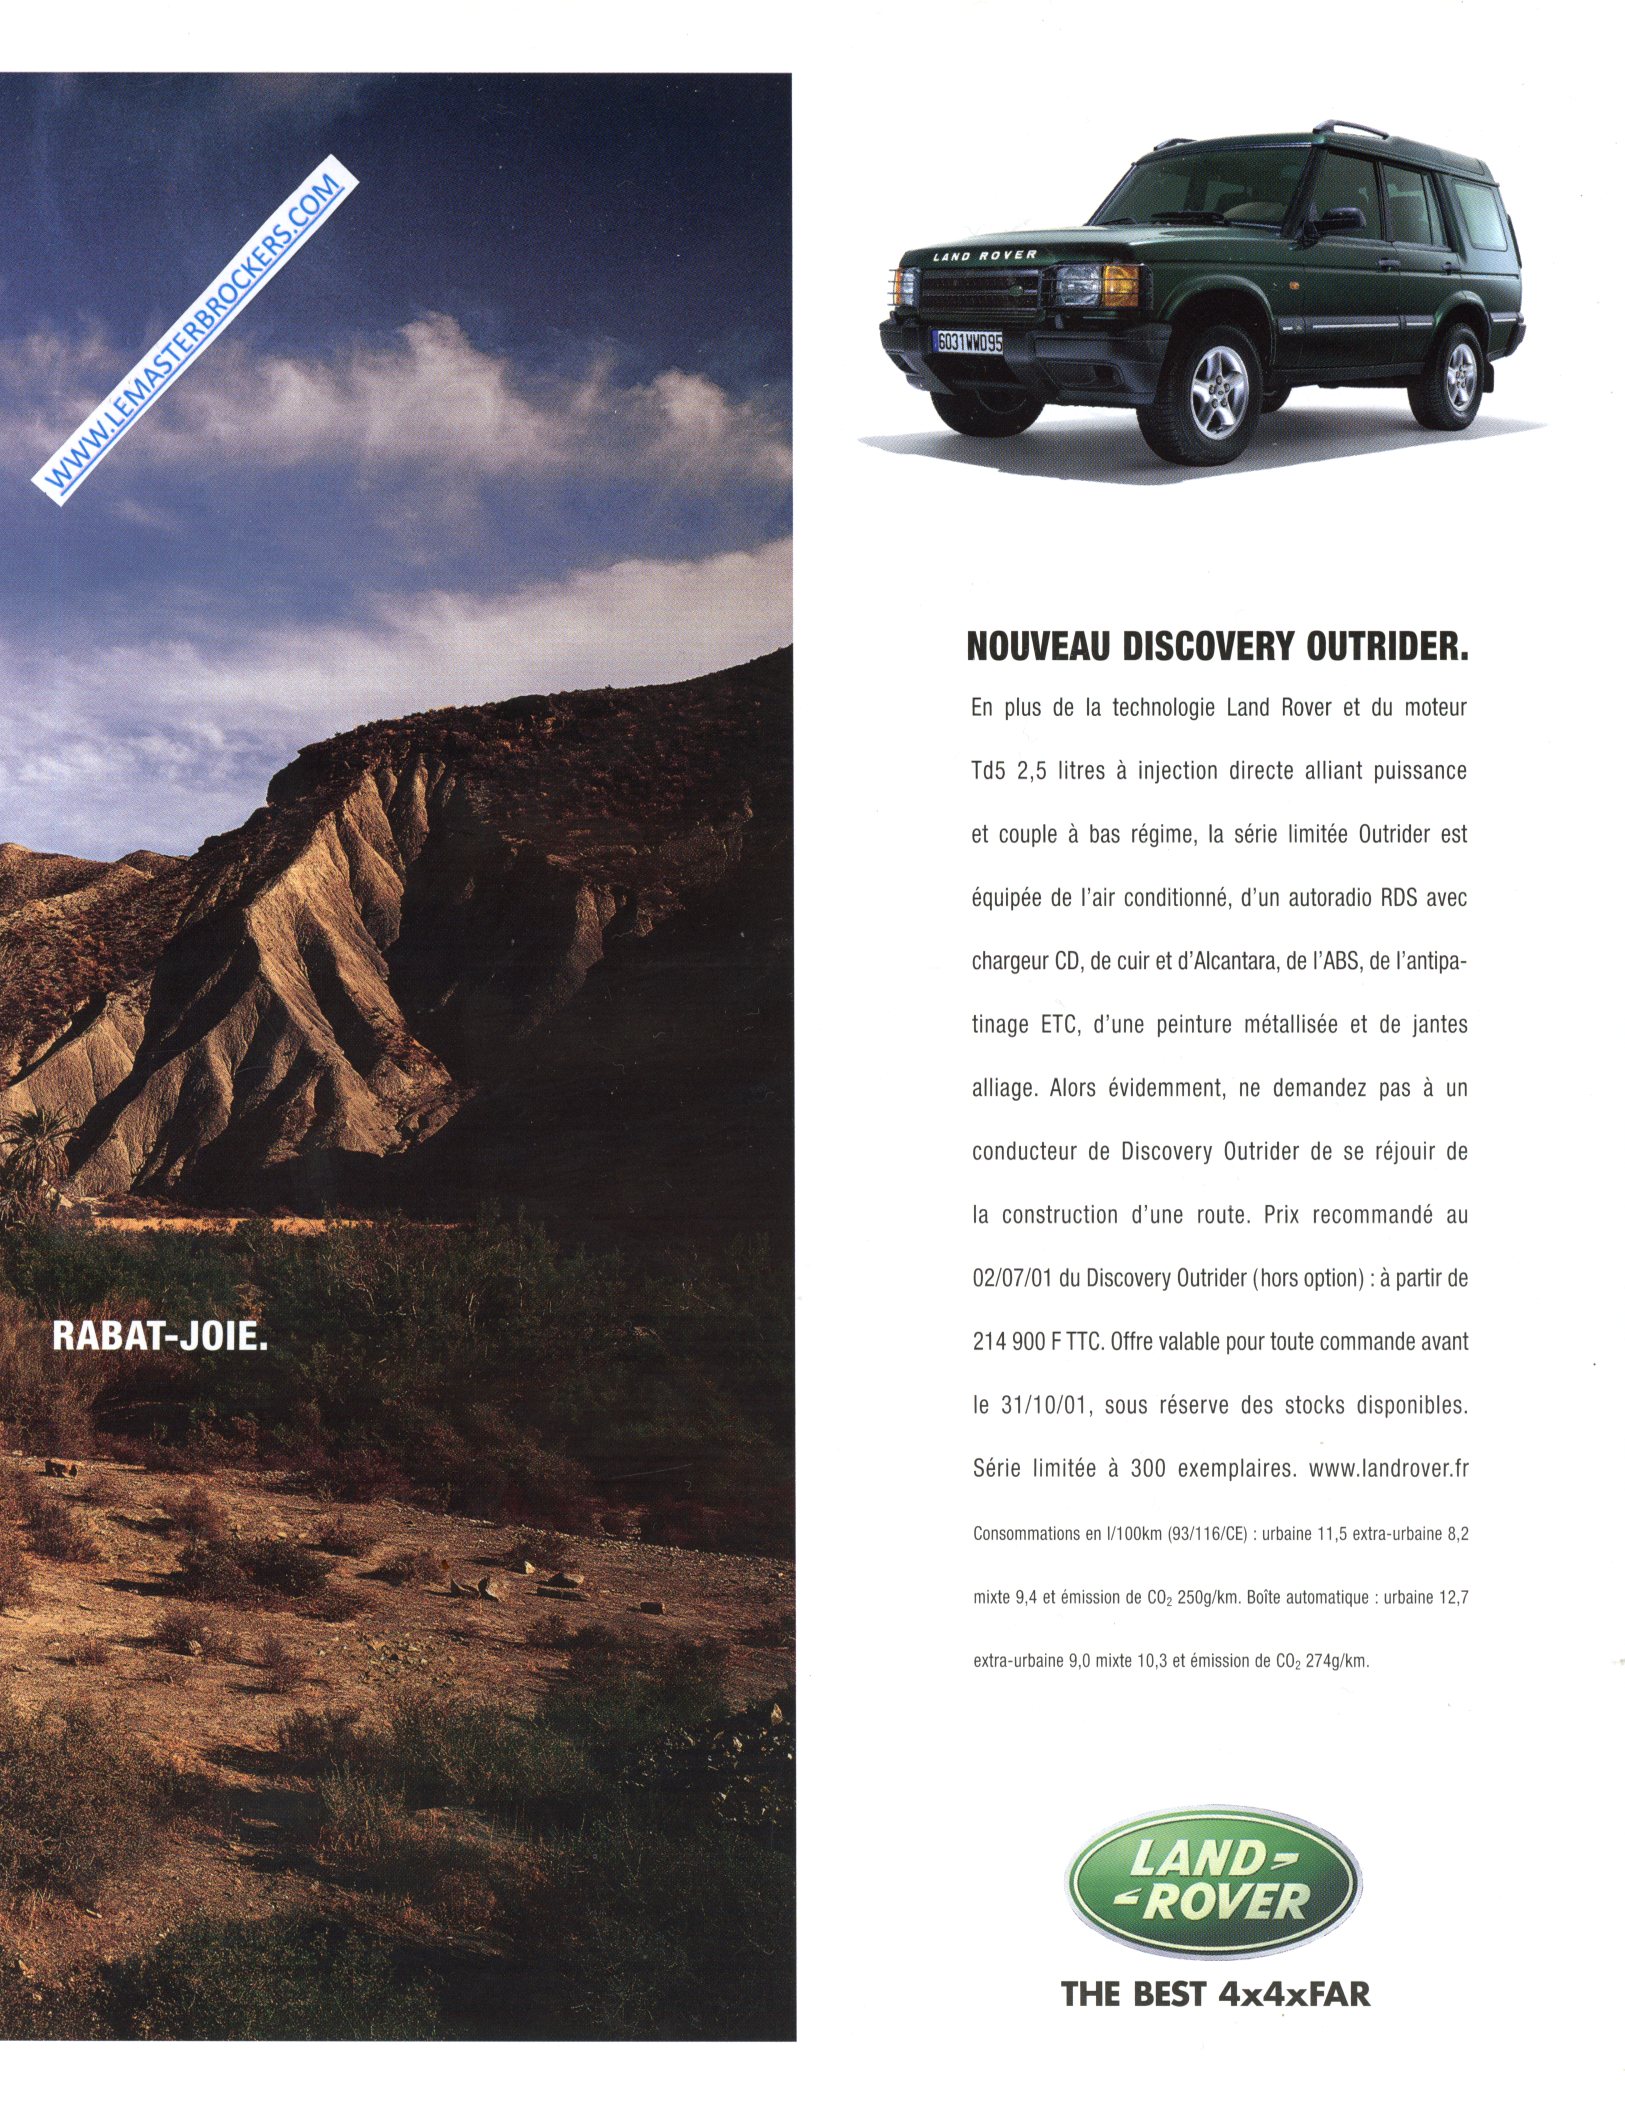 PUBLICITÉ ADVERTISING 2001 LAND ROVER DISCOVERY OUTRIDER LEMASTERBROCKERS